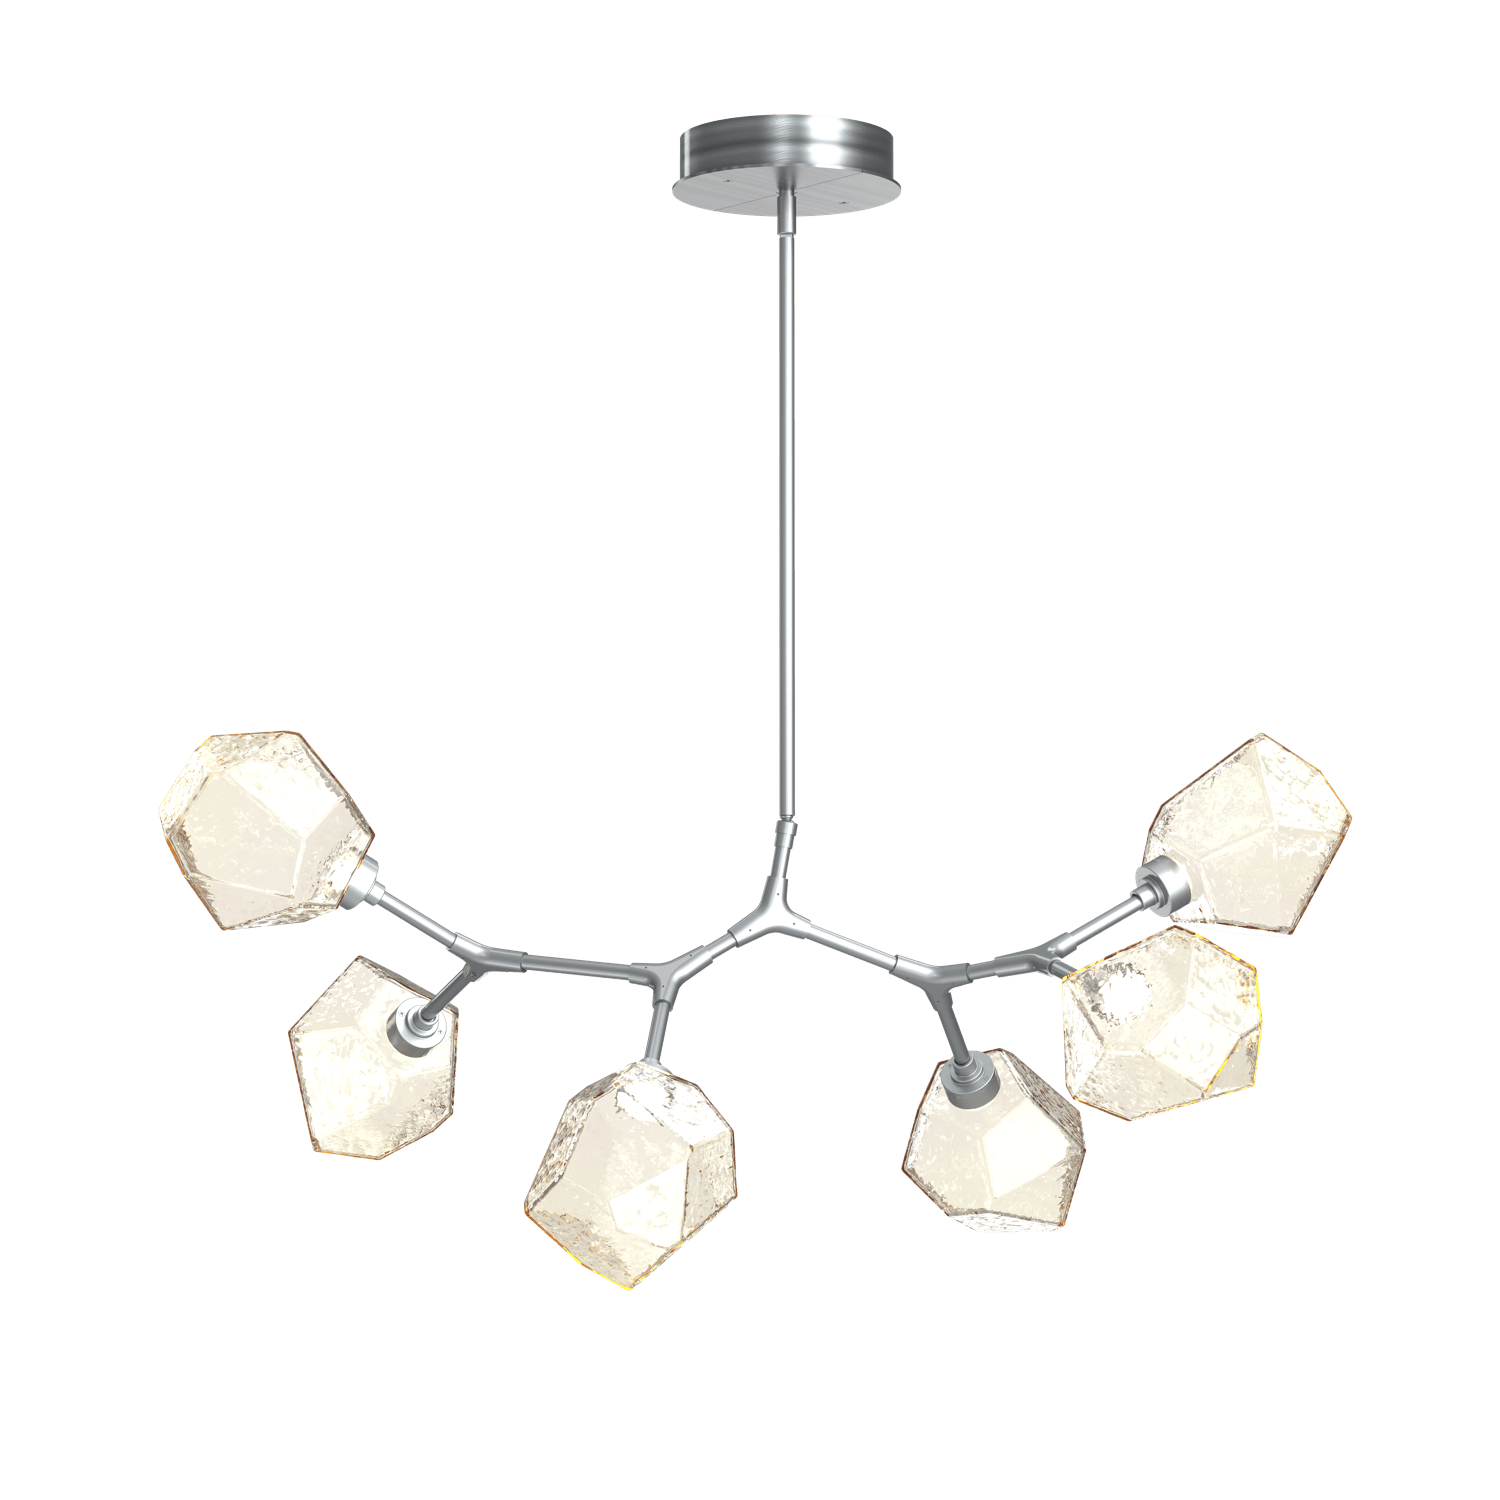 PLB0039-BA-SN-A-Hammerton-Studio-Gem-6-light-modern-branch-chandelier-with-satin-nickel-finish-and-amber-blown-glass-shades-and-LED-lamping